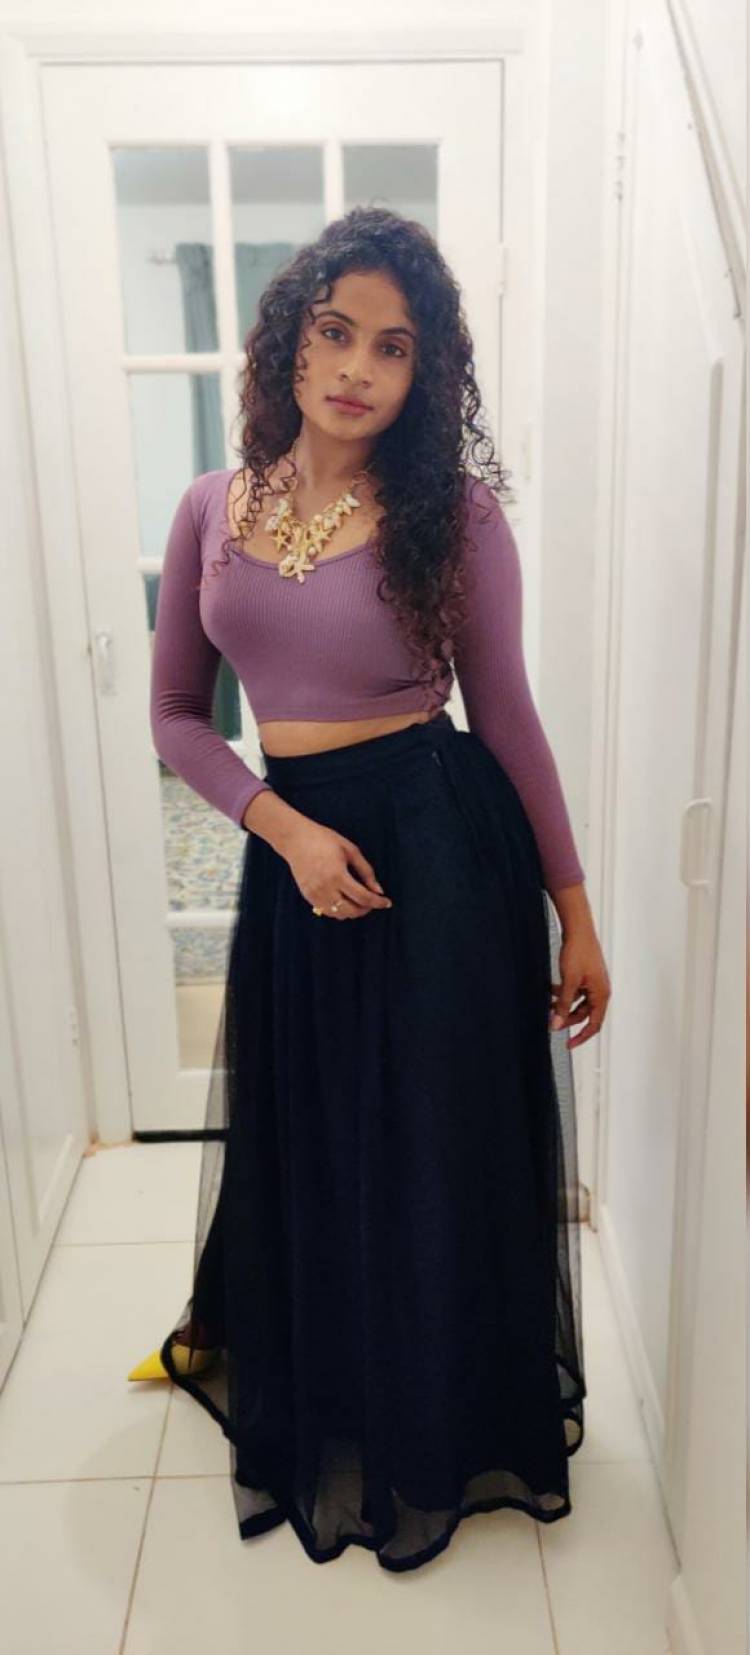 Upcoming Actress #Shubaa looks like a bombshell in these beautiful outfits..